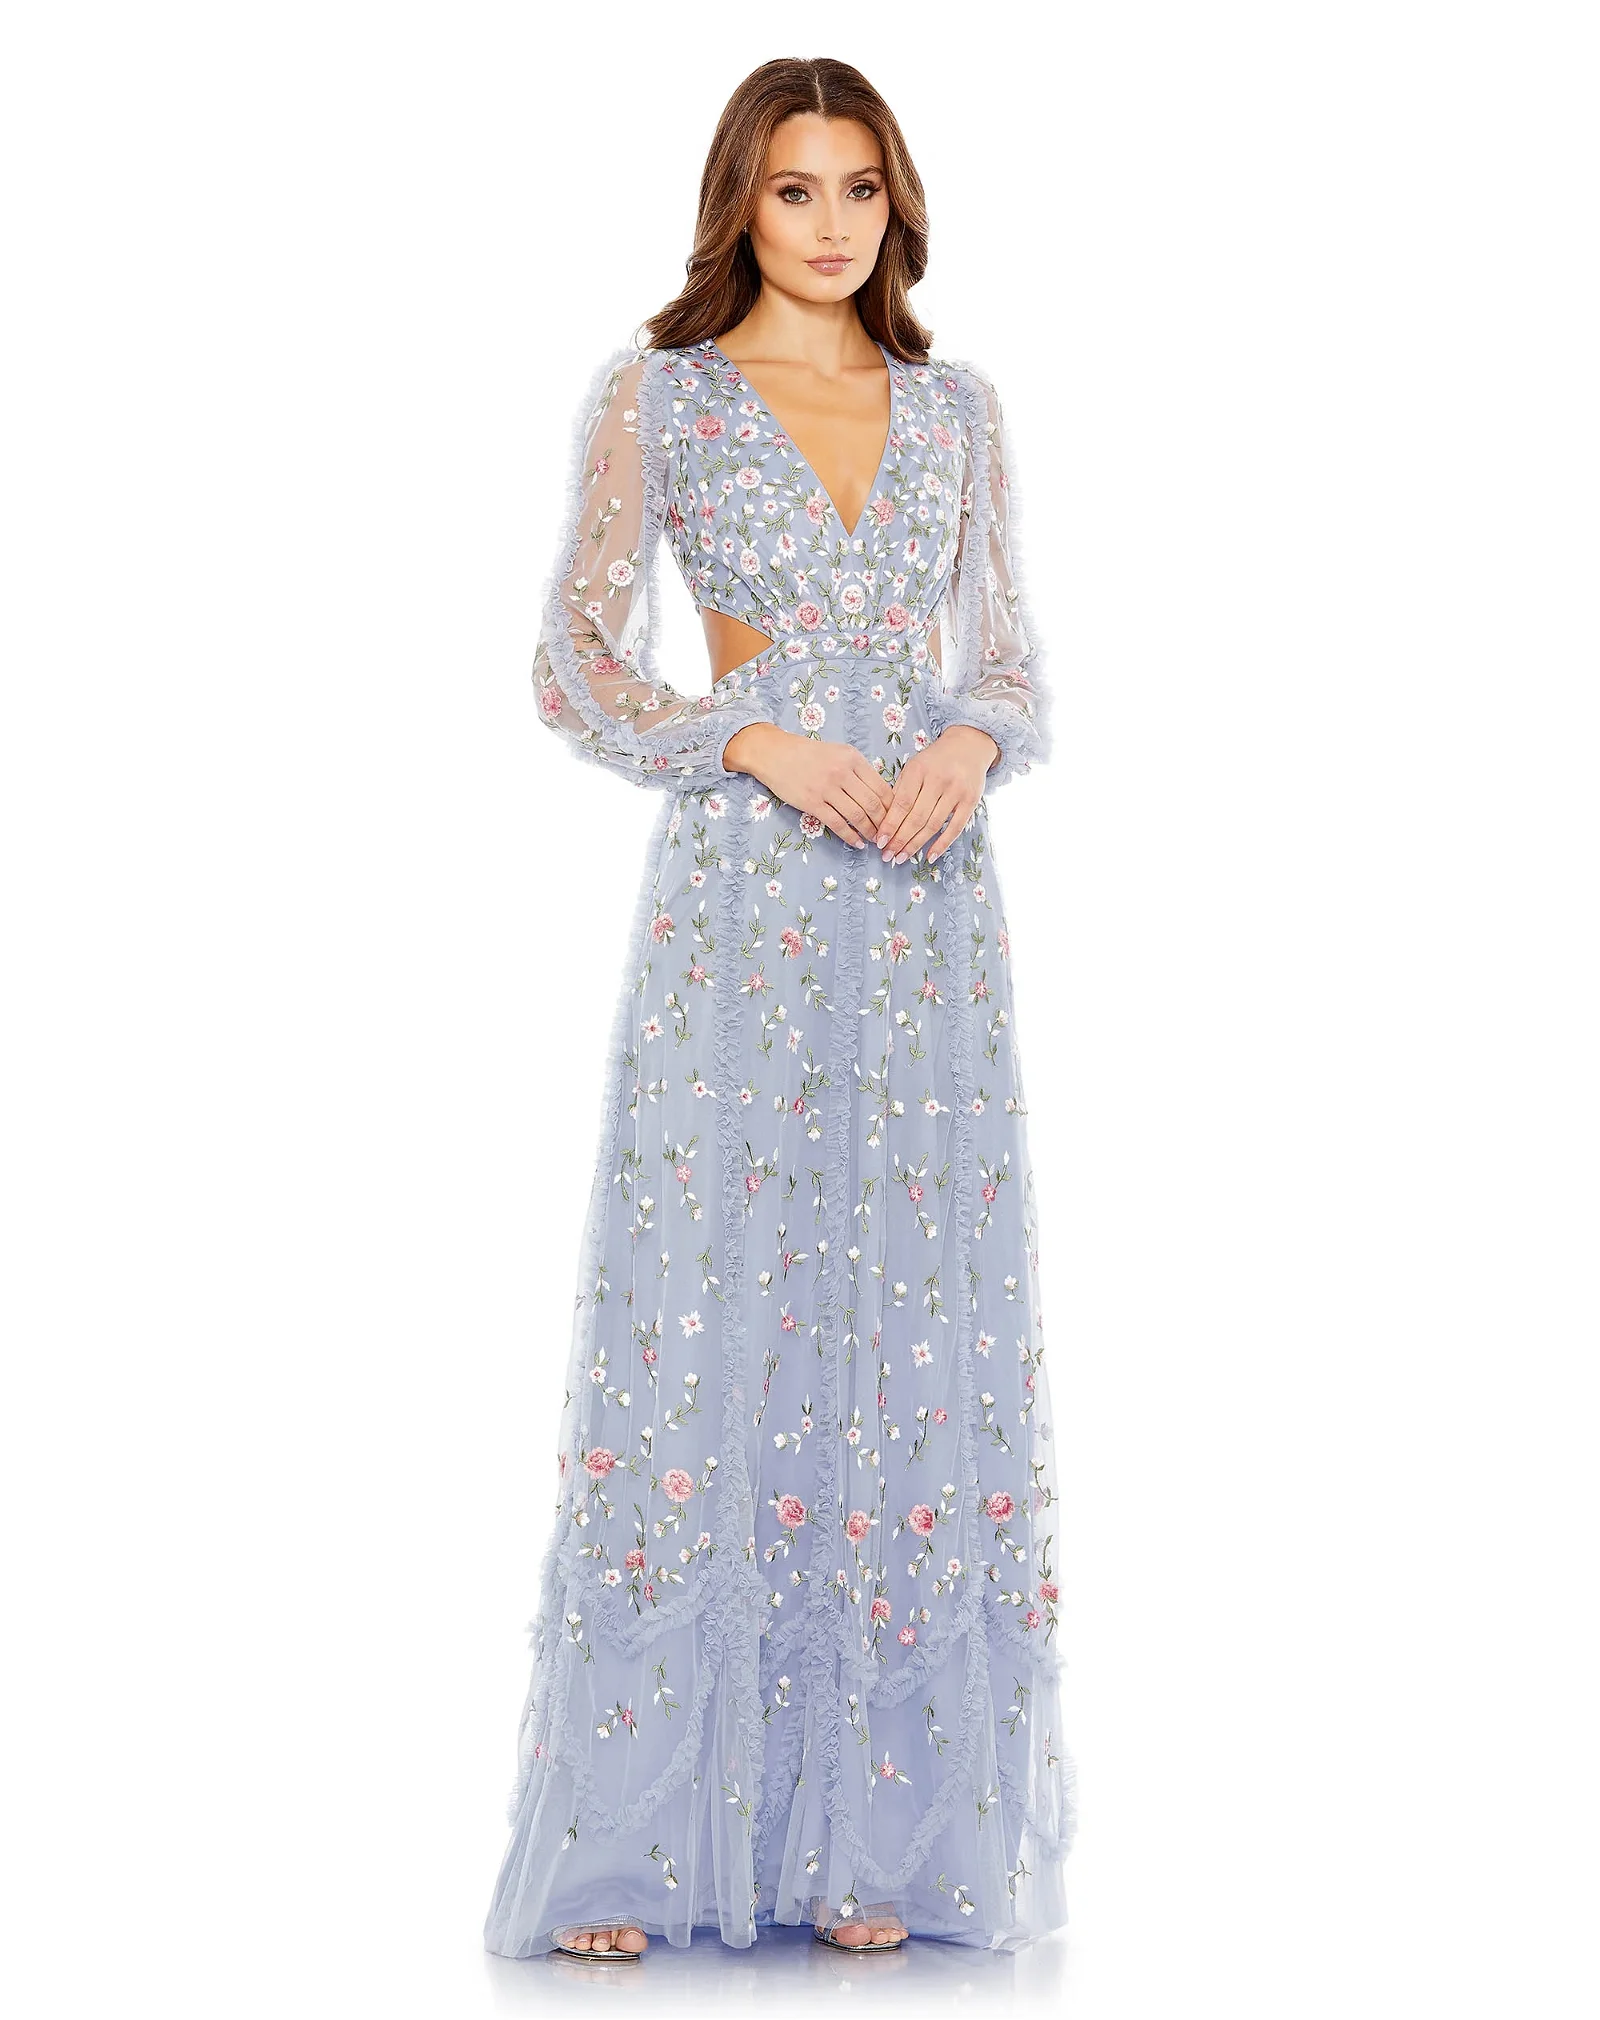 Image of Long Sleeve Embellished Cut Out A-Line Gown